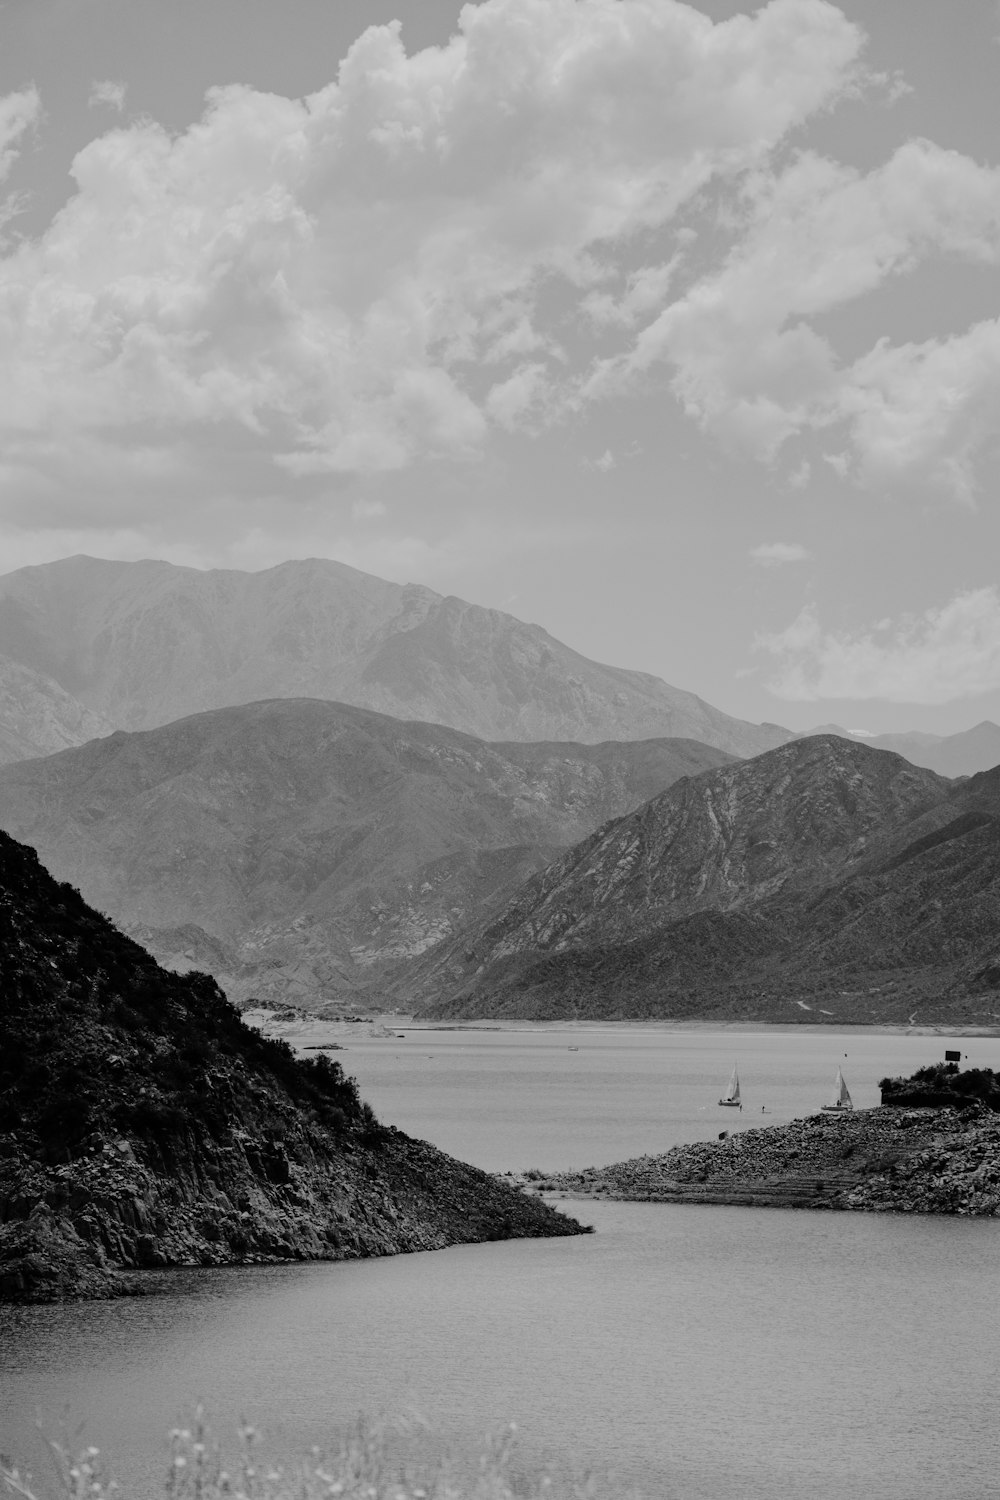 grayscale photo of mountains and body of water